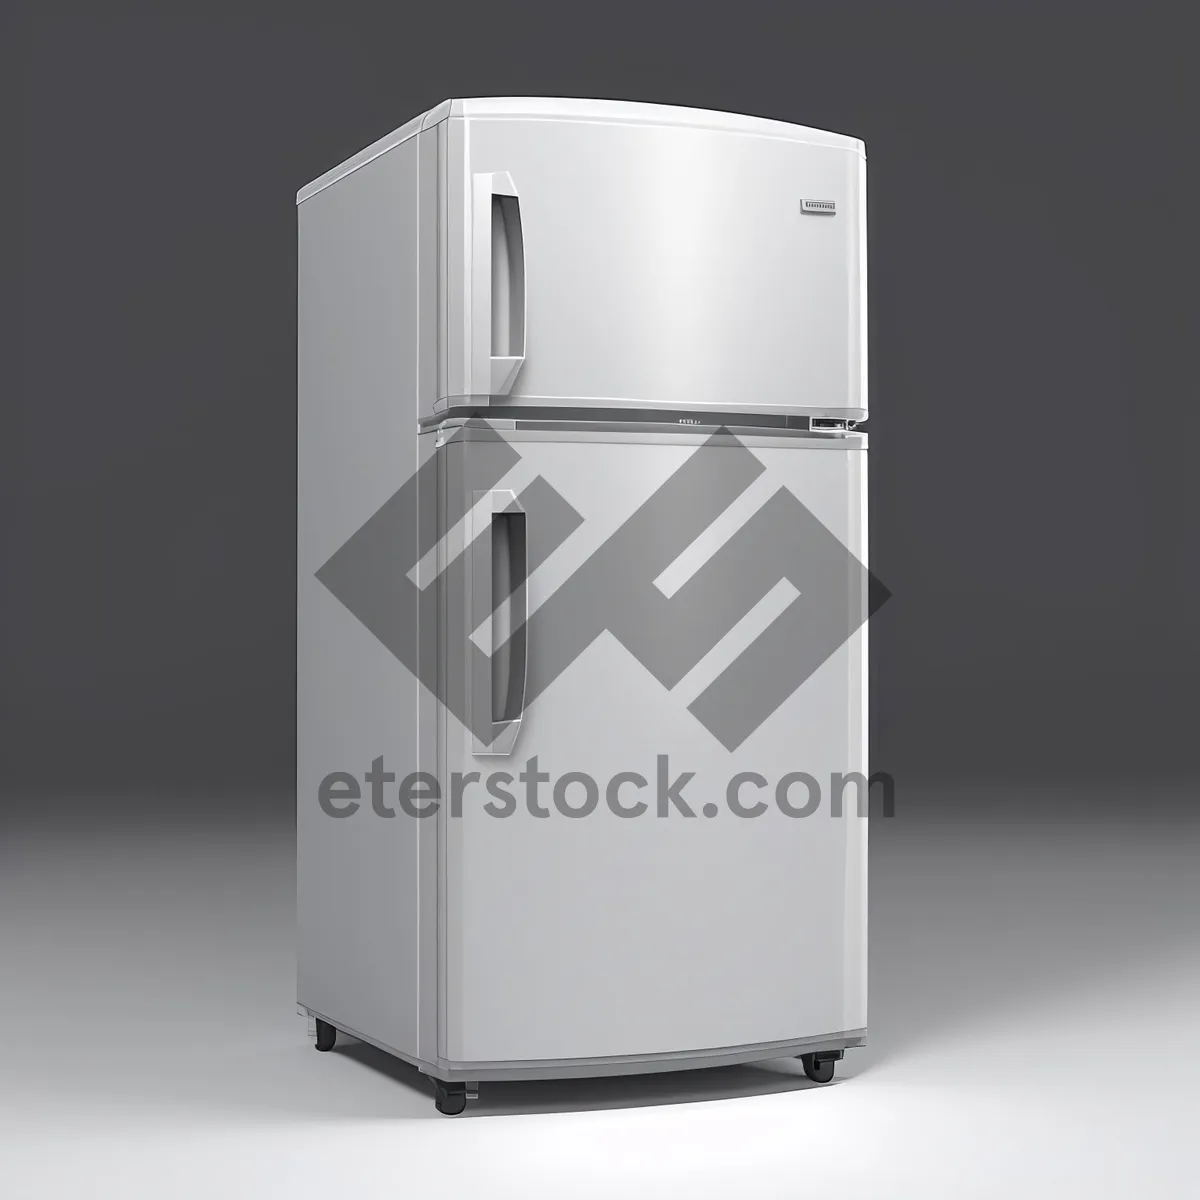 Picture of Refrigeration System - 3D Render of Modern Cooling Device.